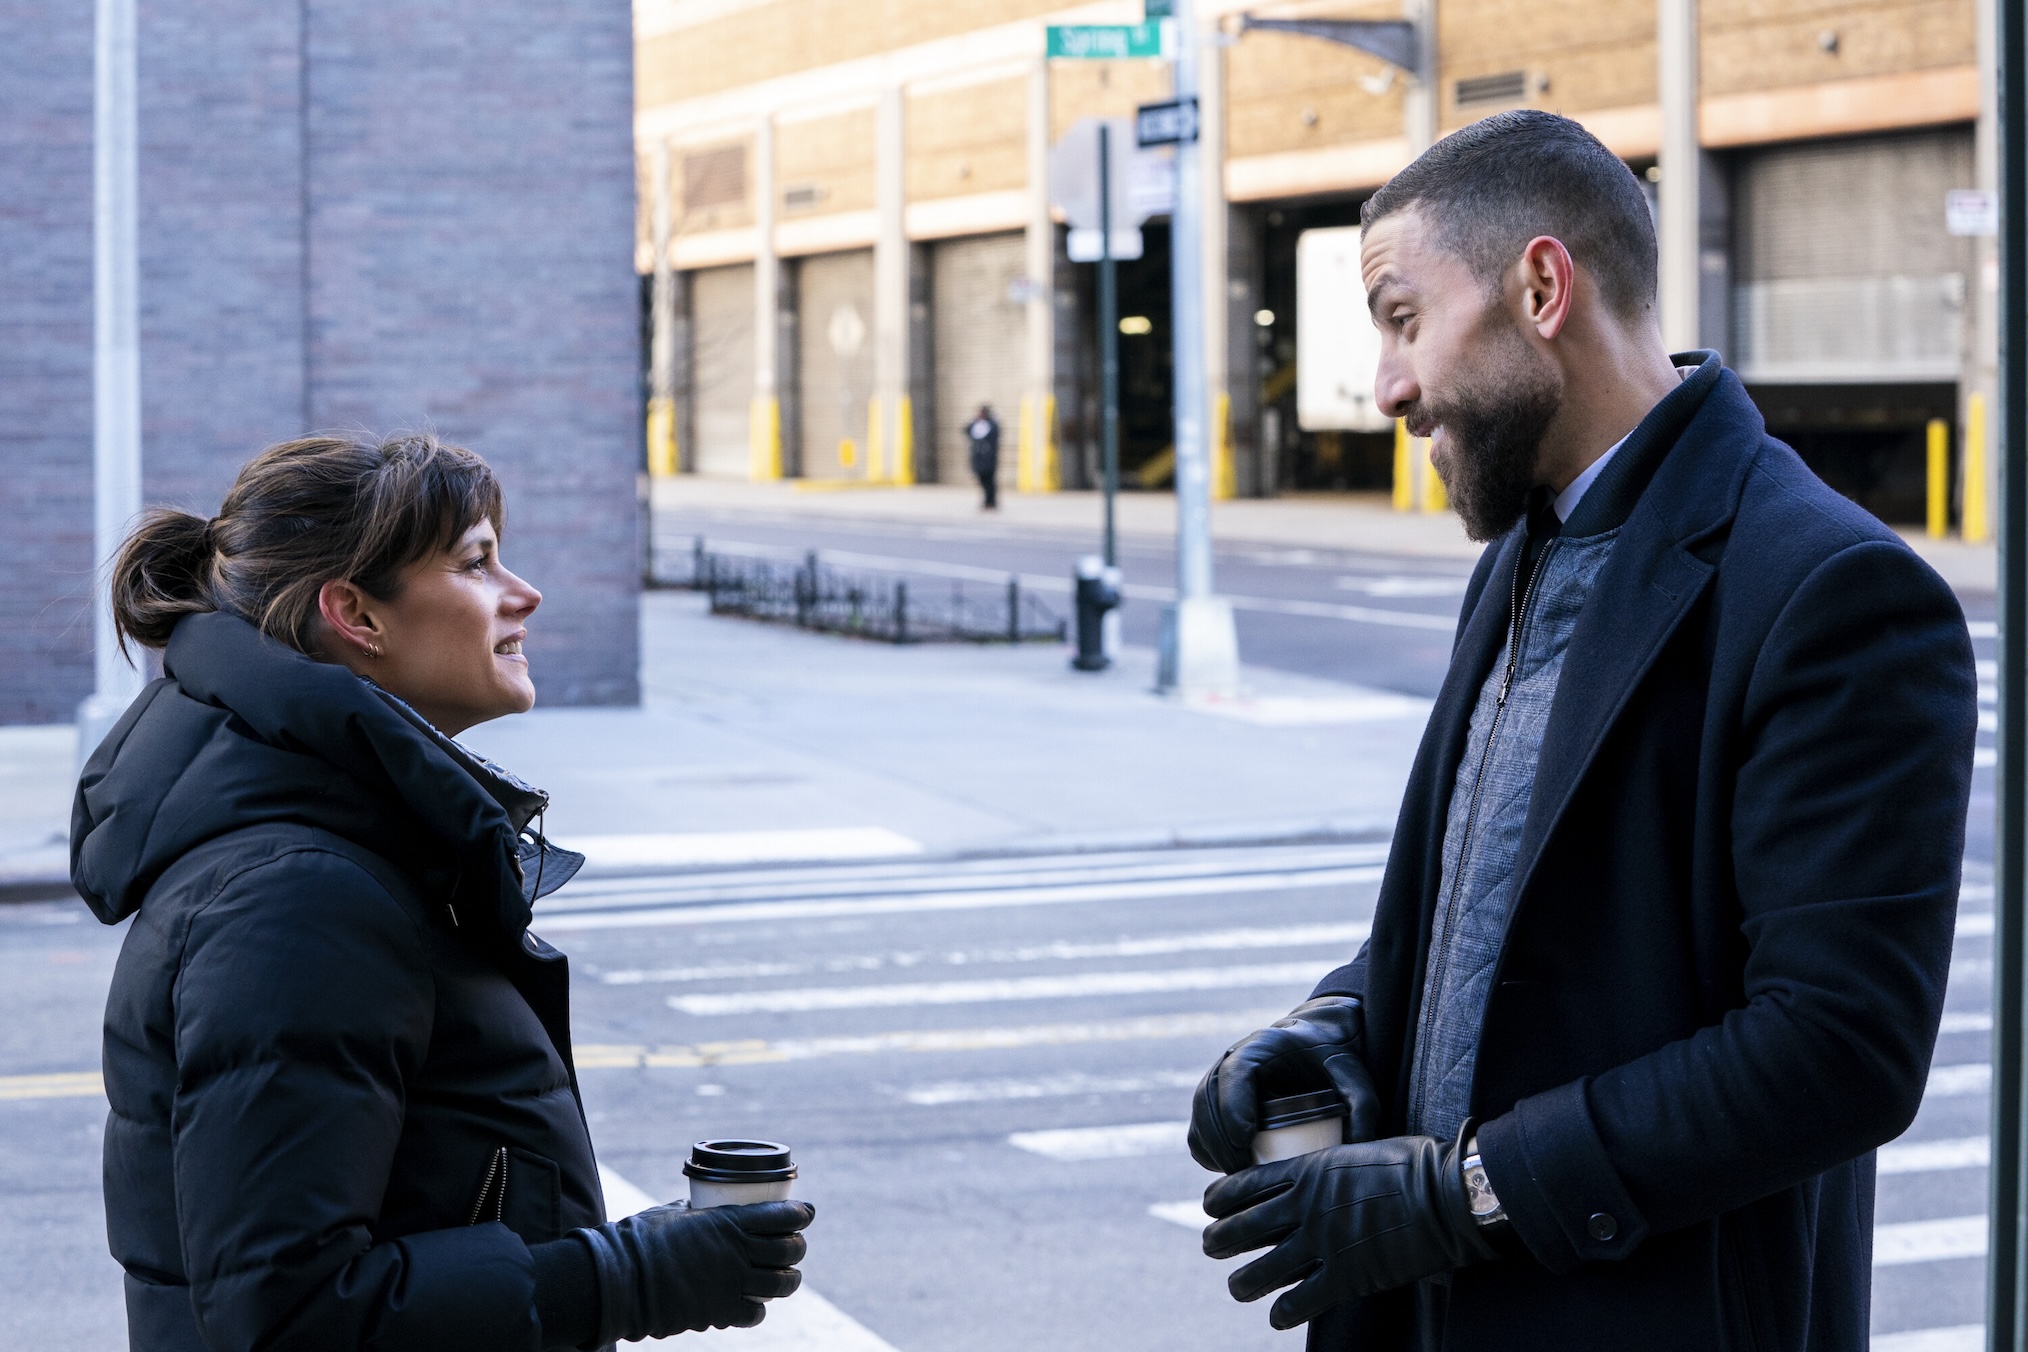 Could Maggie & OA Get Together? Missy Peregrym Weighs In